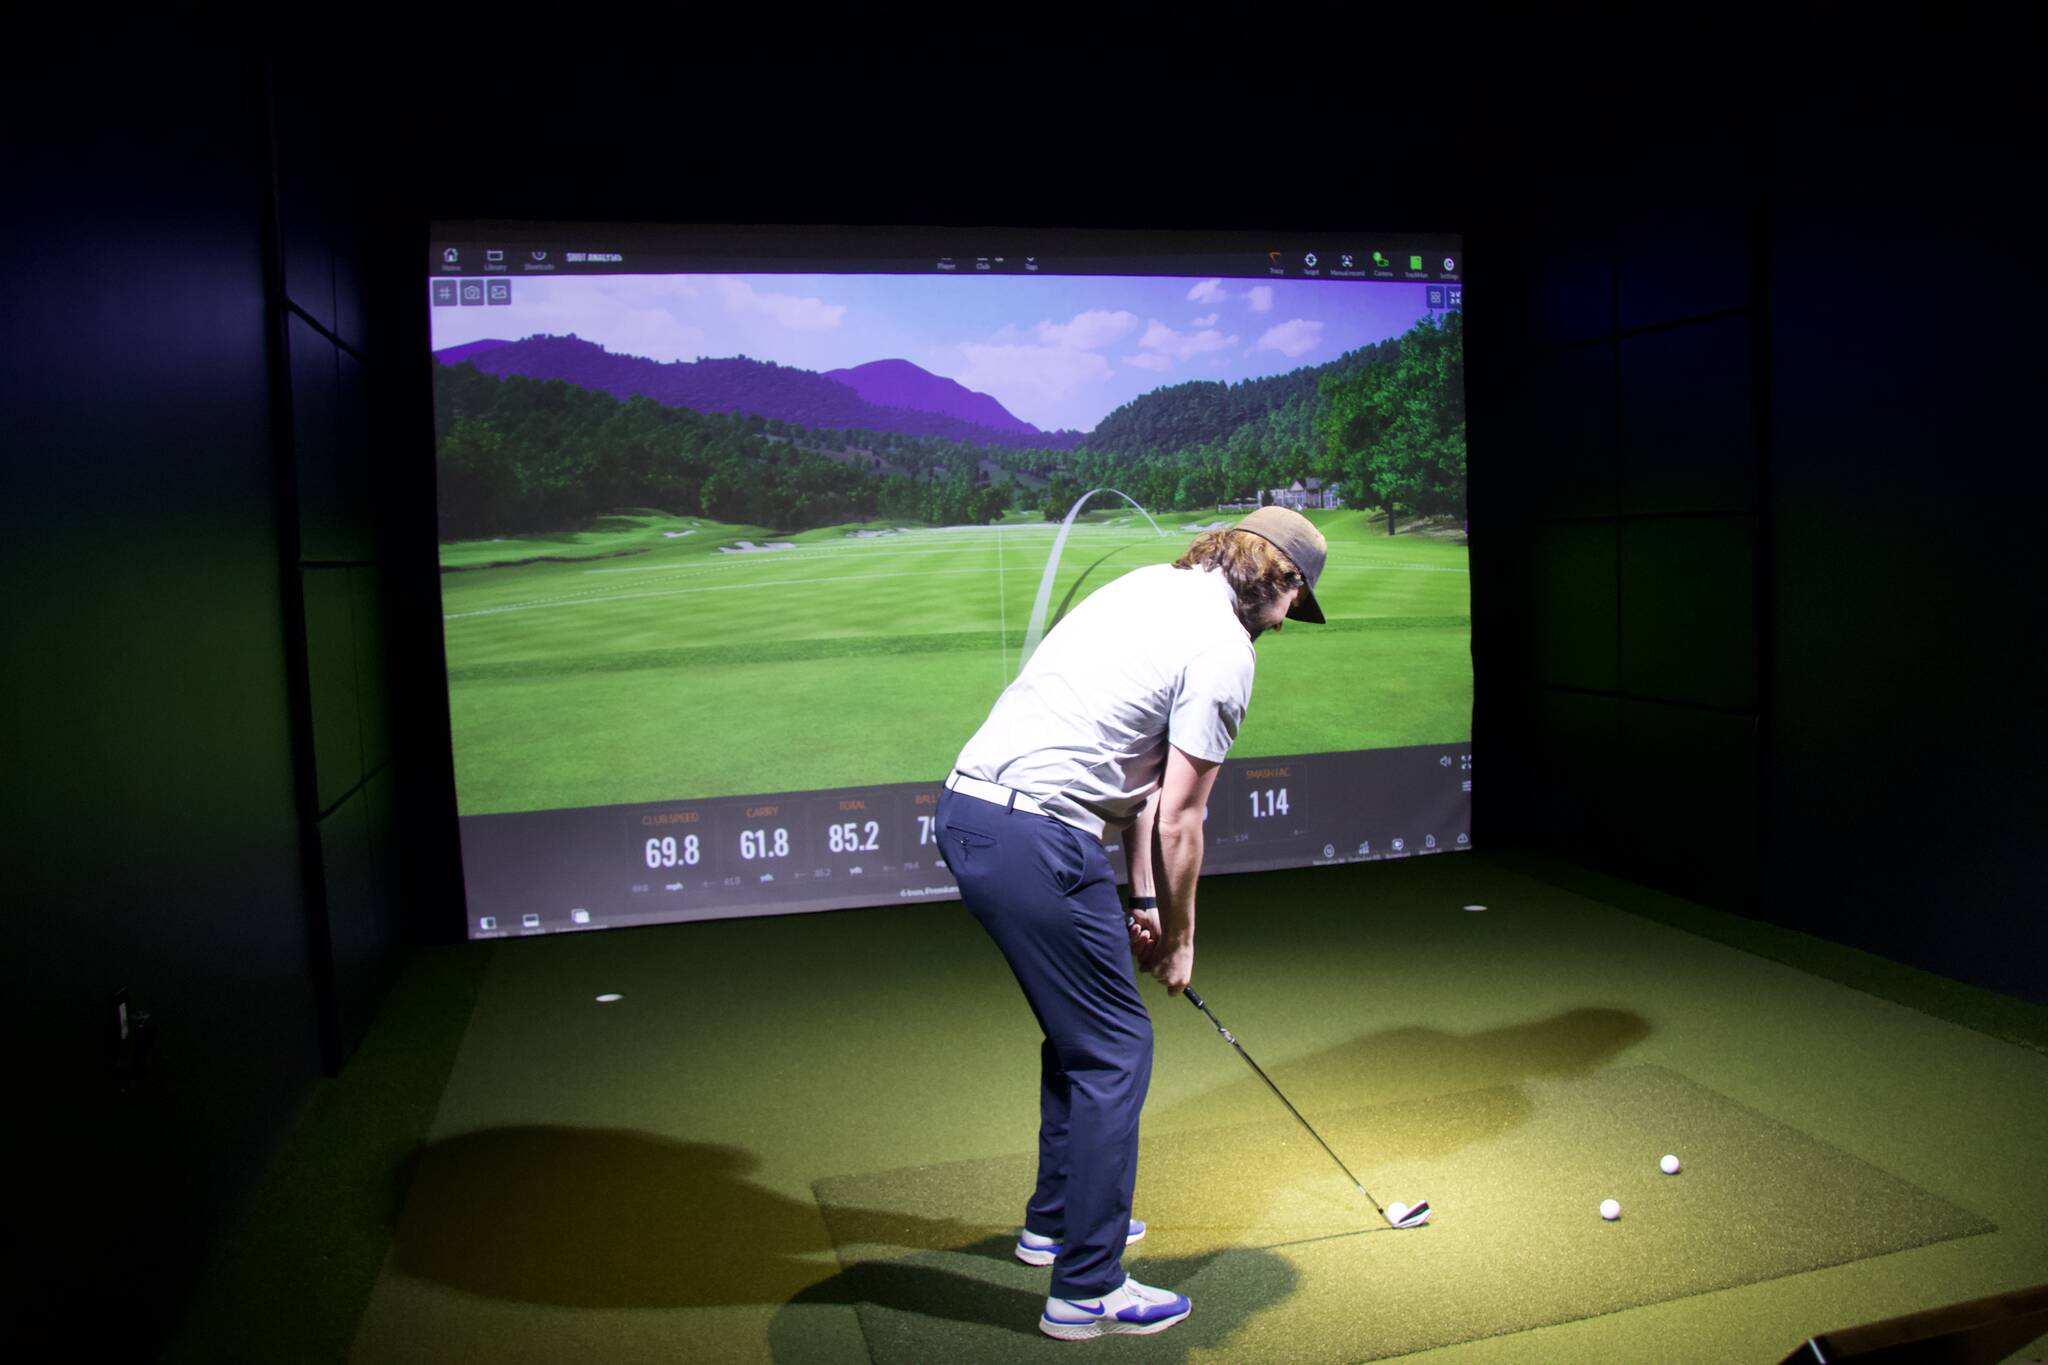 Photo by Rachel Rosen/Whidbey News-Times
Puget Sound golf Club owner Josh Ray takes a swing using the golf simulator.